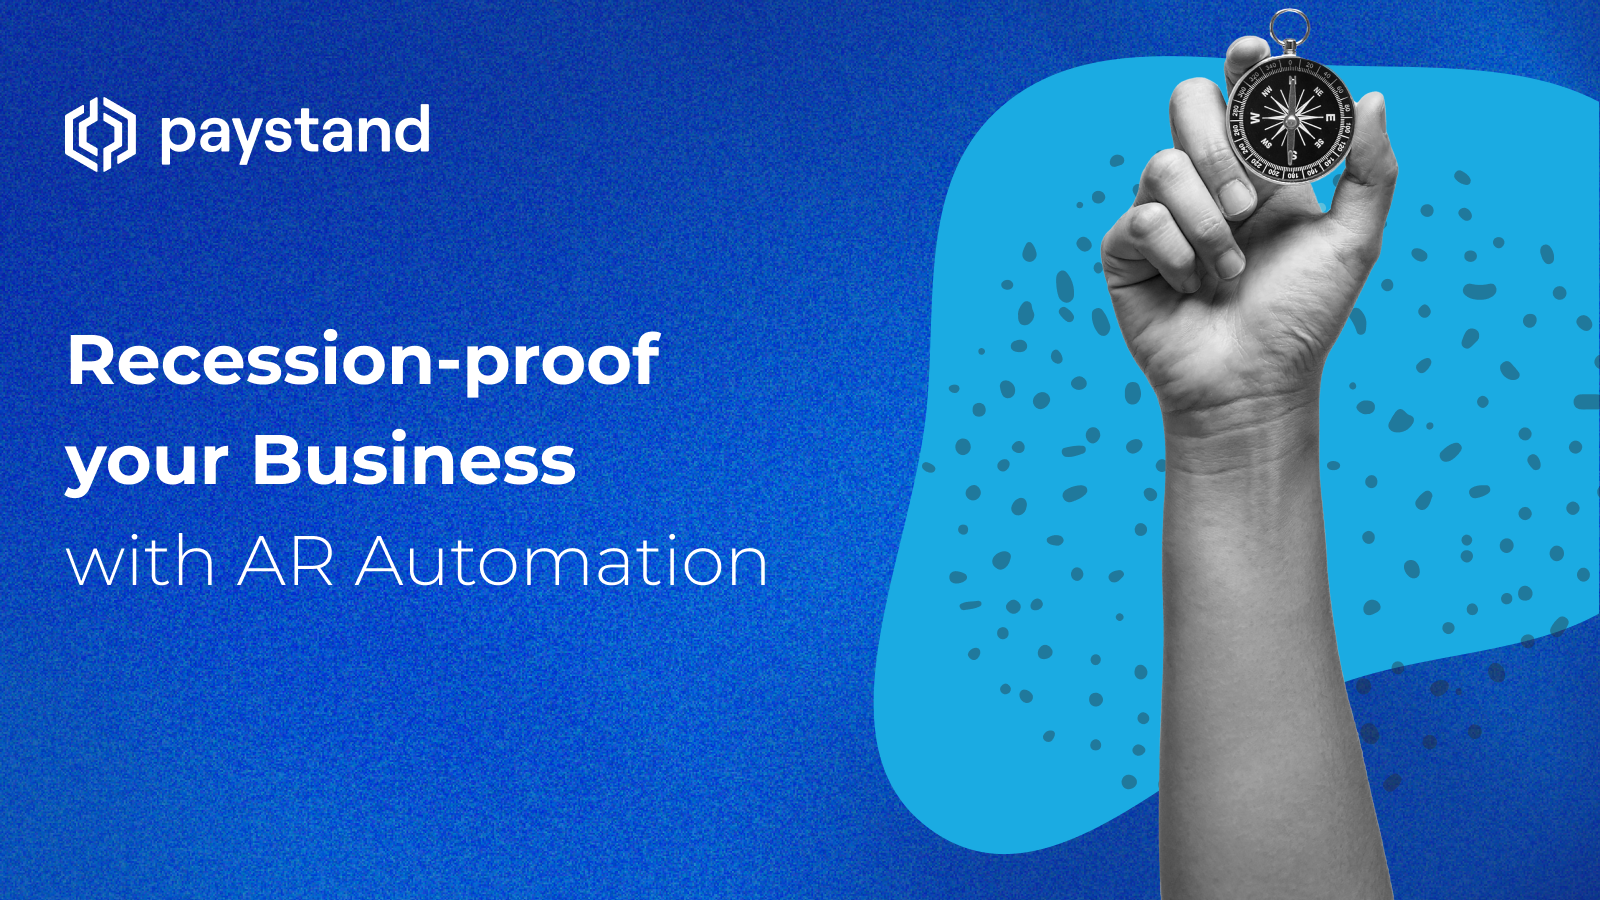 Recession-proof your Business with AR Automation